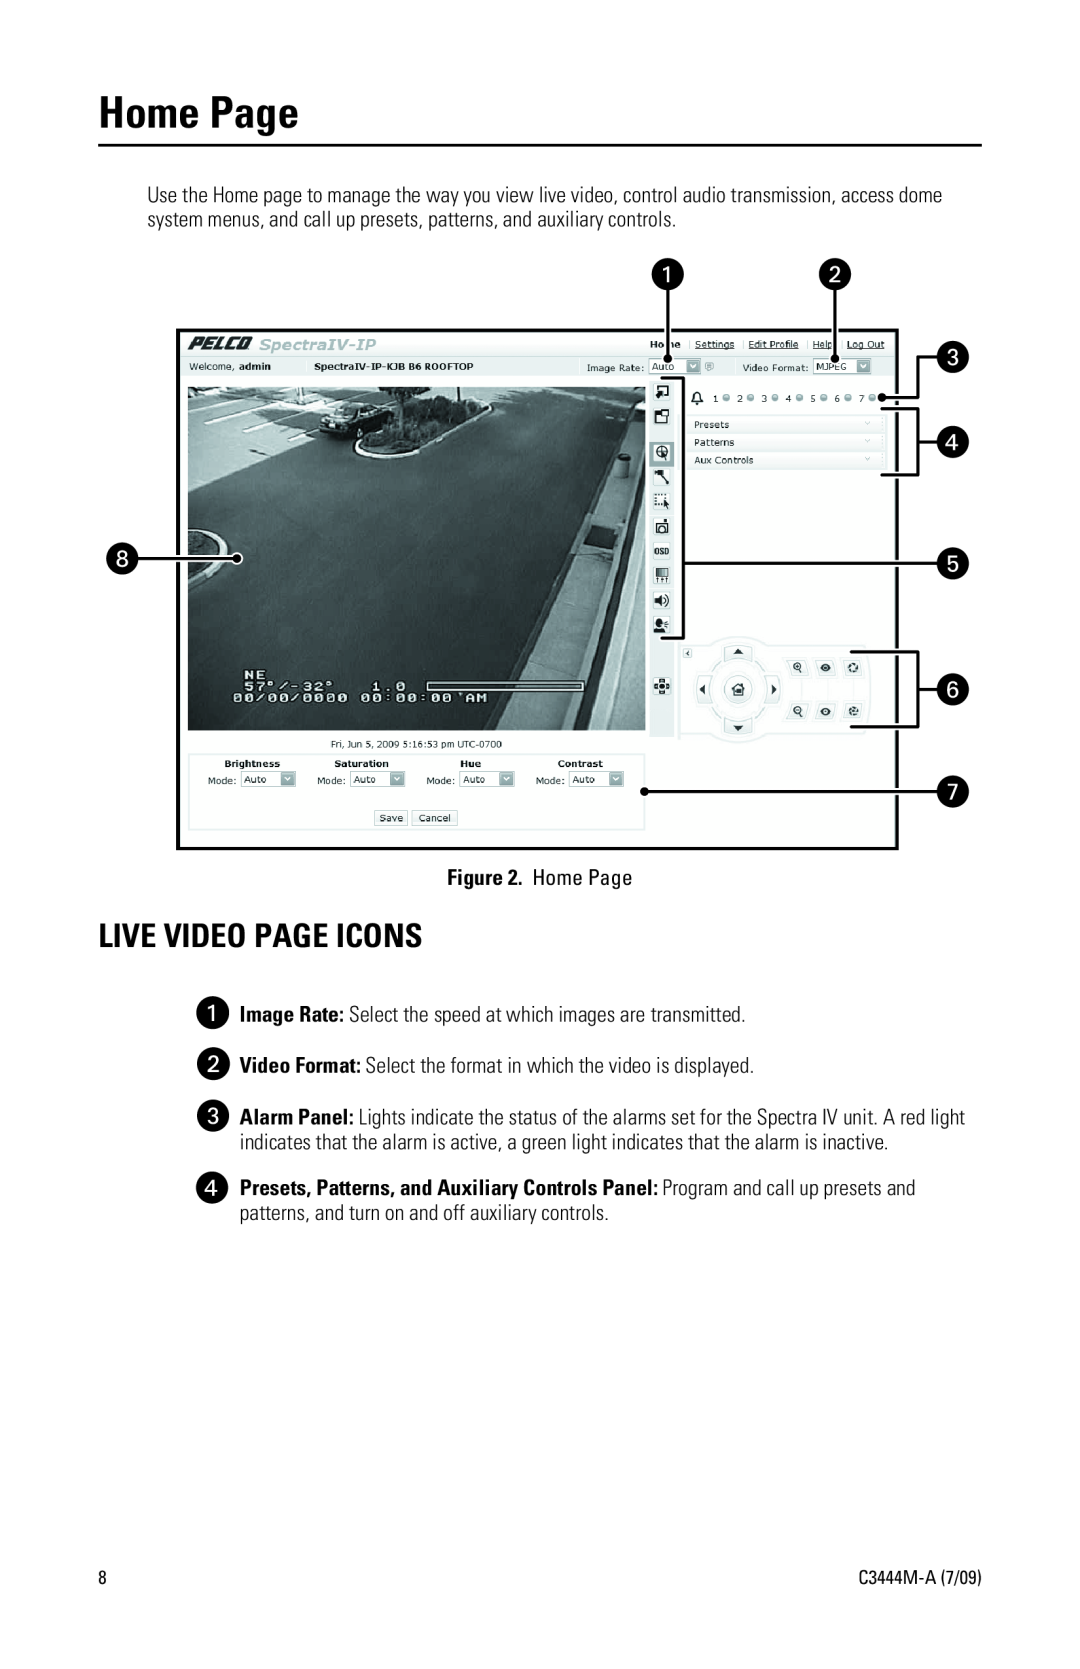 Pelco IV IP manual Home Page, Live Video Page Icons 